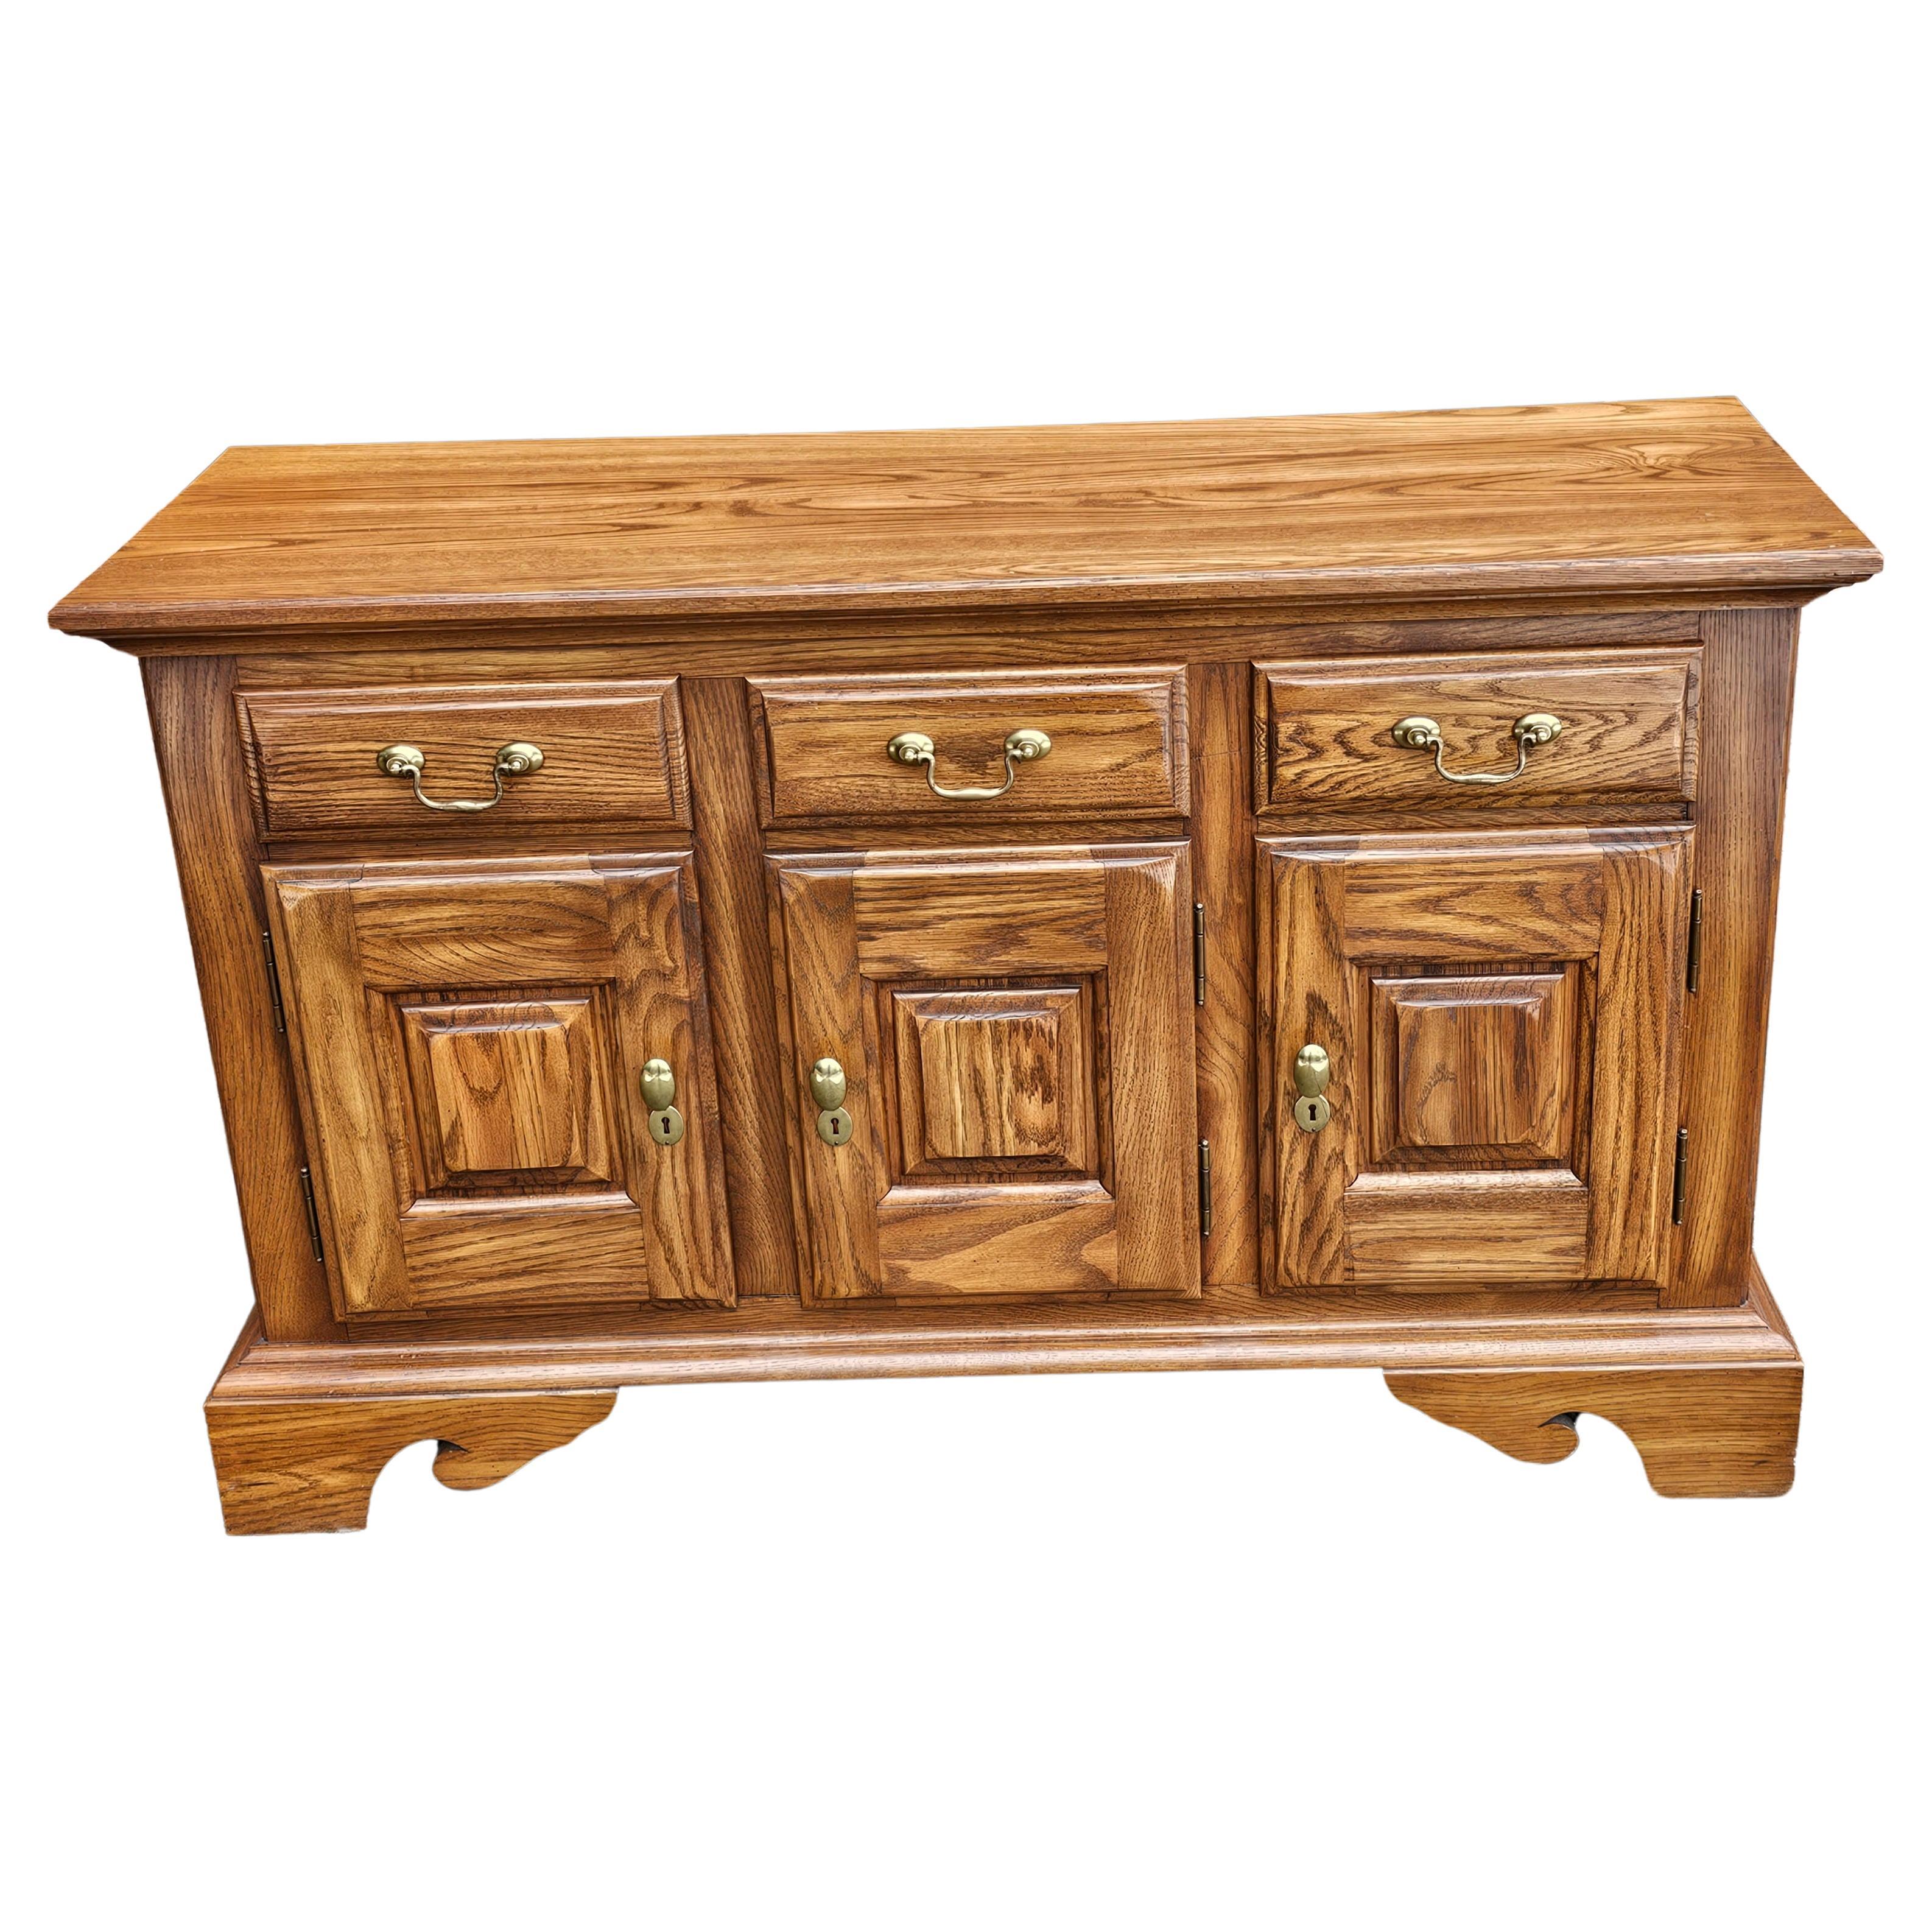 A Pennsylvania House Contemporary Chippendale Style solid oak sideboard Buffet featuring rare 3 drawer and compartmented two door bottom storage cabinet with removable shelf and single door cabinet. Very good vintage condition. Measures 52